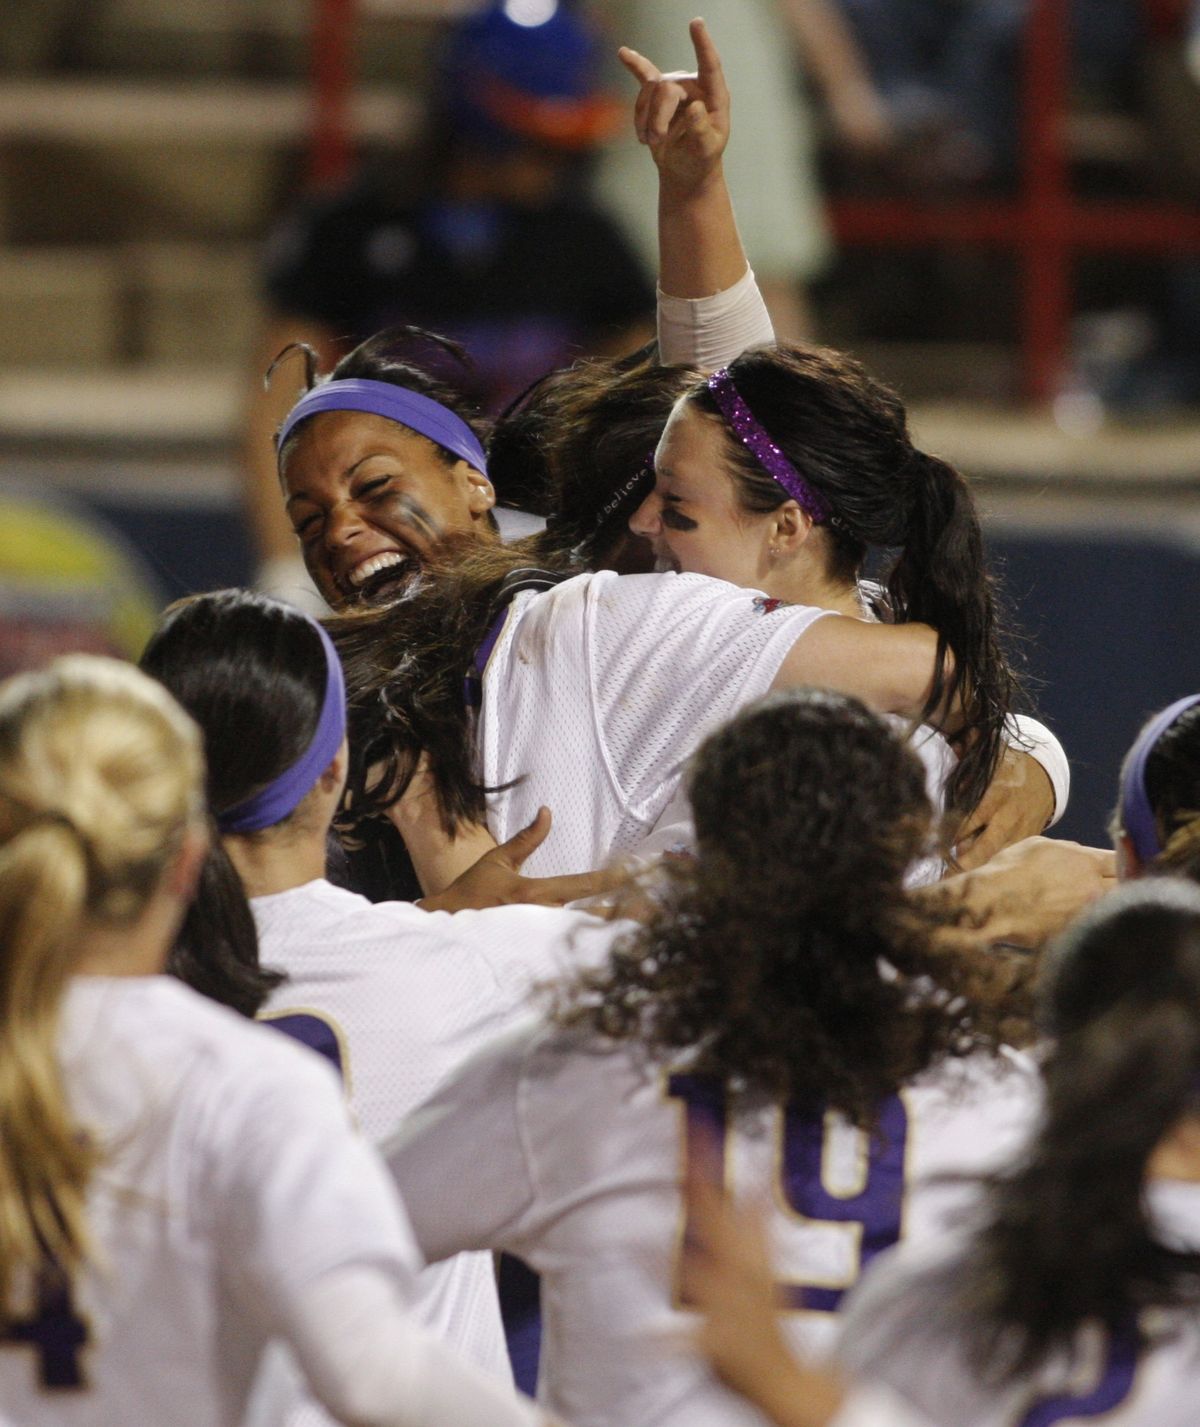 Washington’s Niki Williams, top left, Alicia Blake, center, and Danielle Lawrie are mobbed by teammates at home plate as Washington defeats Florida 3-2 for the NCAA softball title. (Associated Press / The Spokesman-Review)